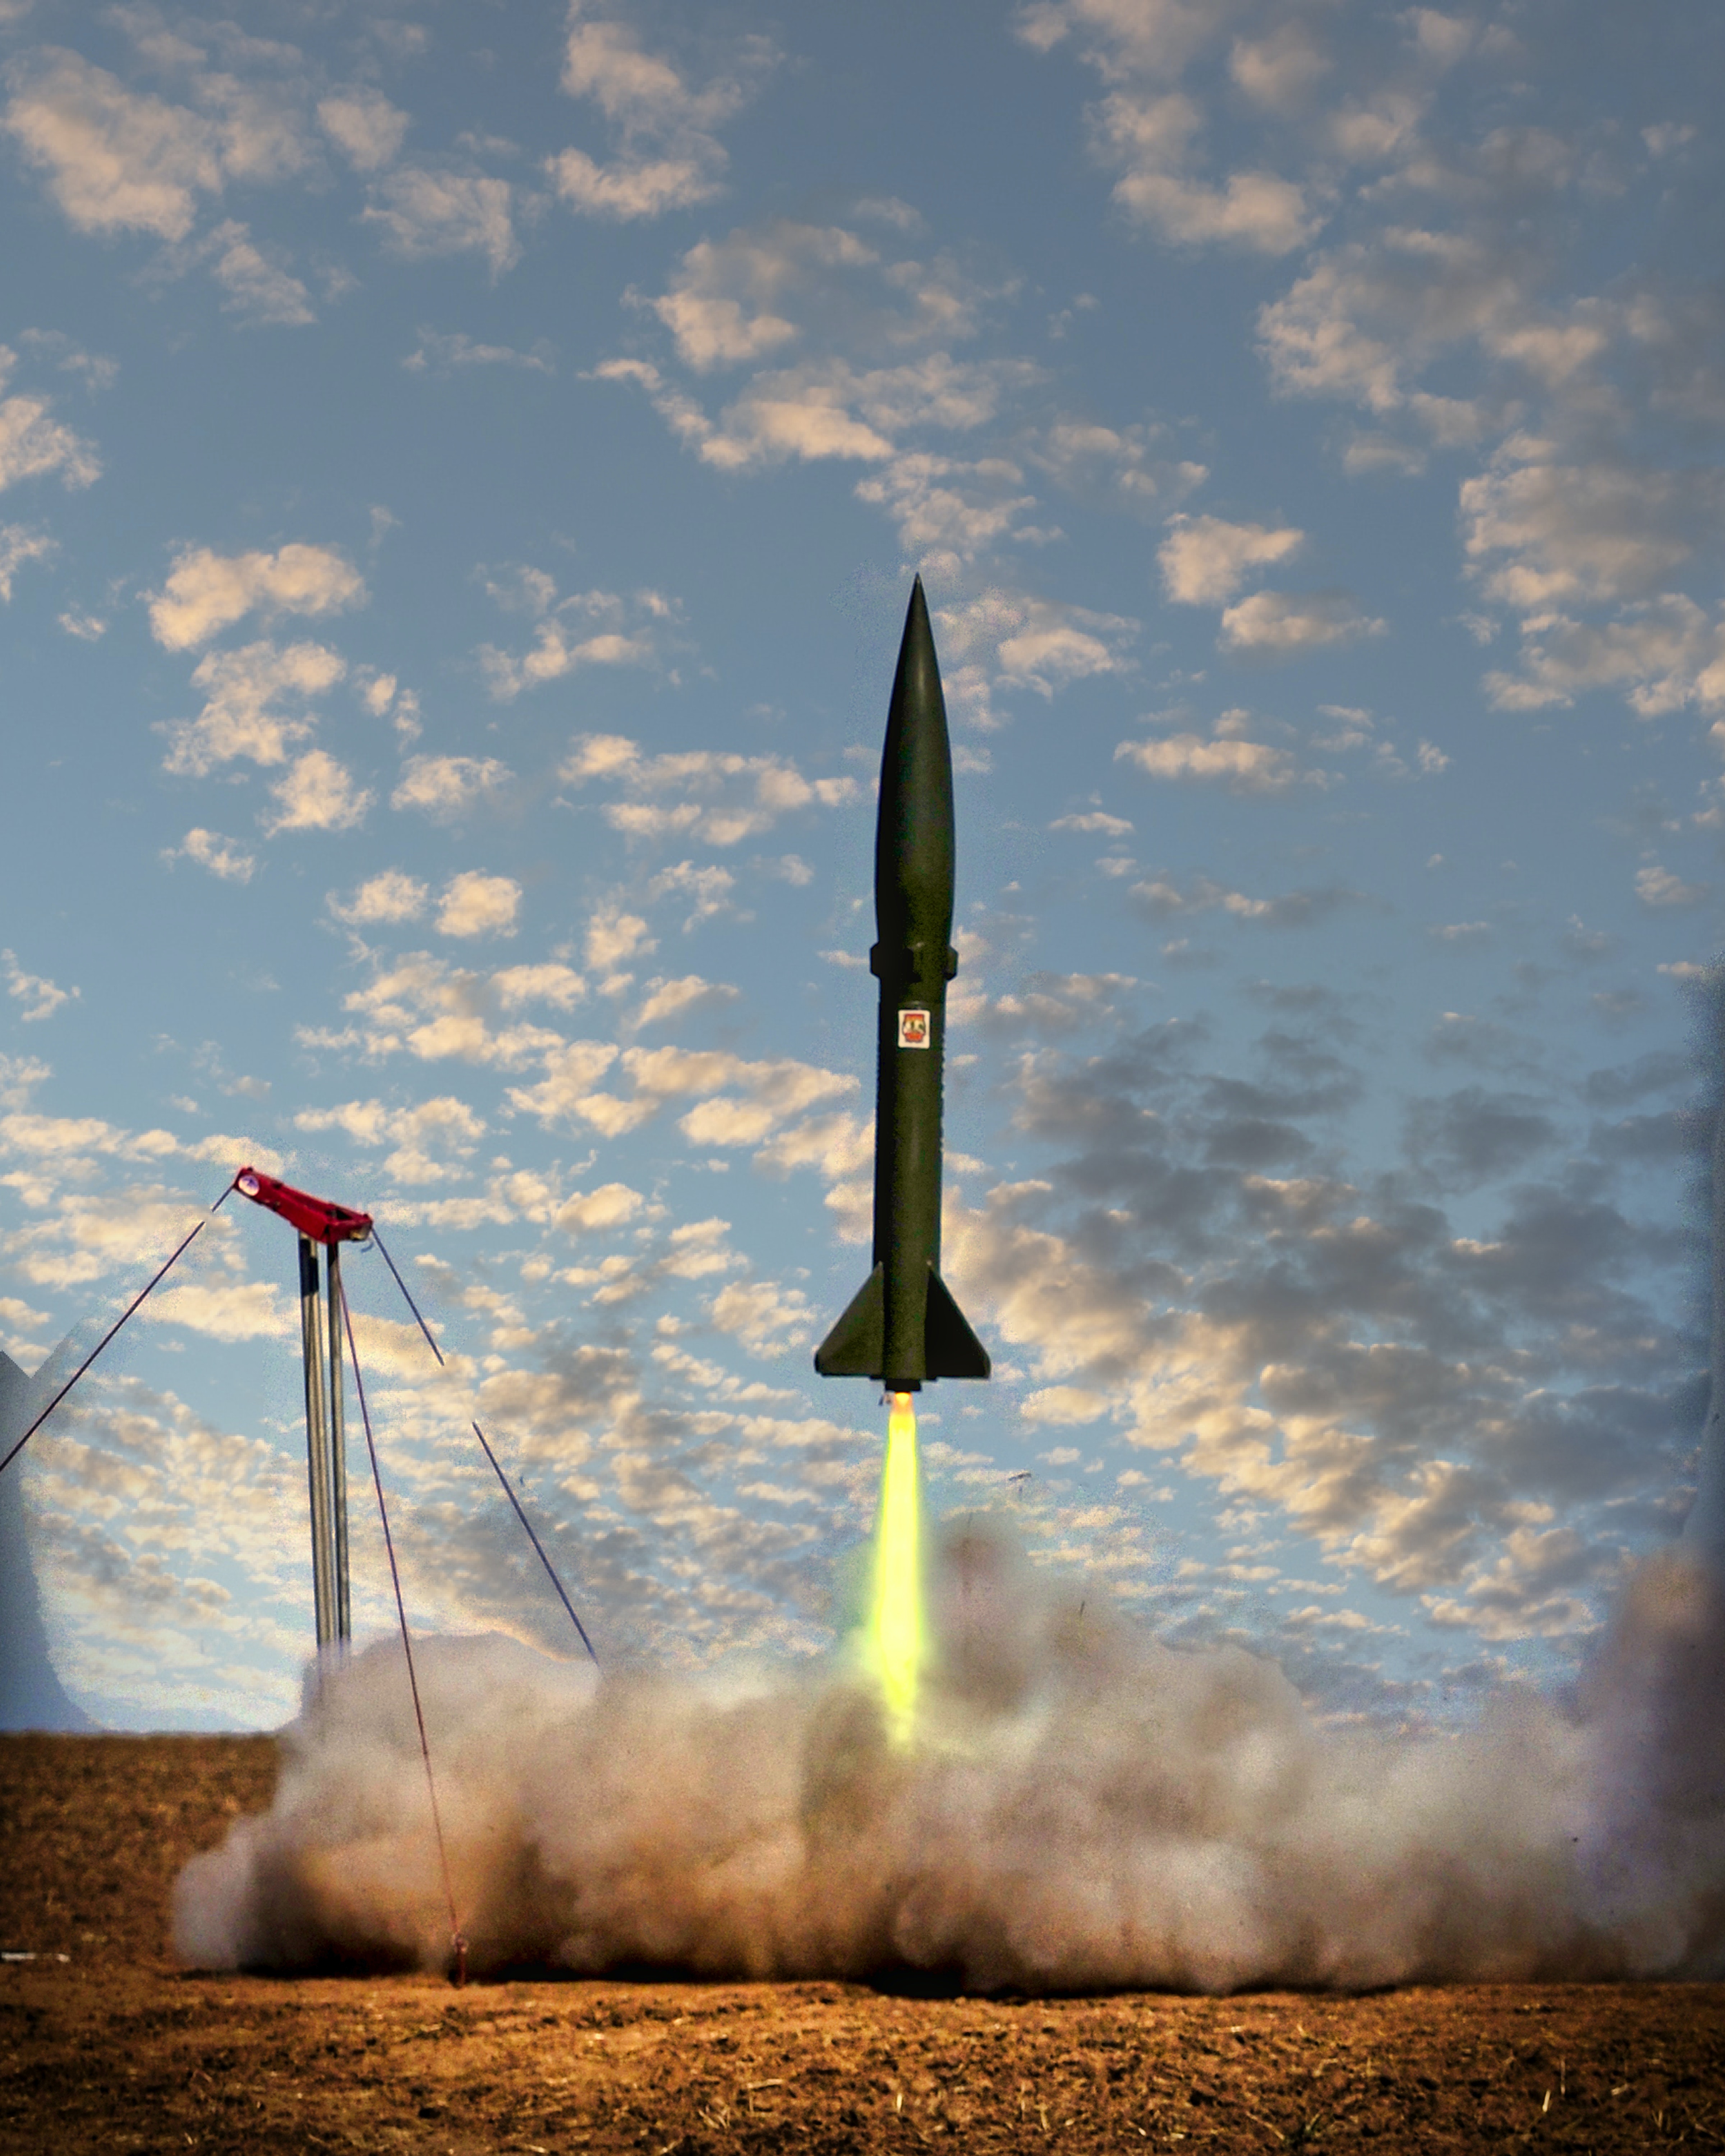 Missile photos download the best free missile stock photos hd images